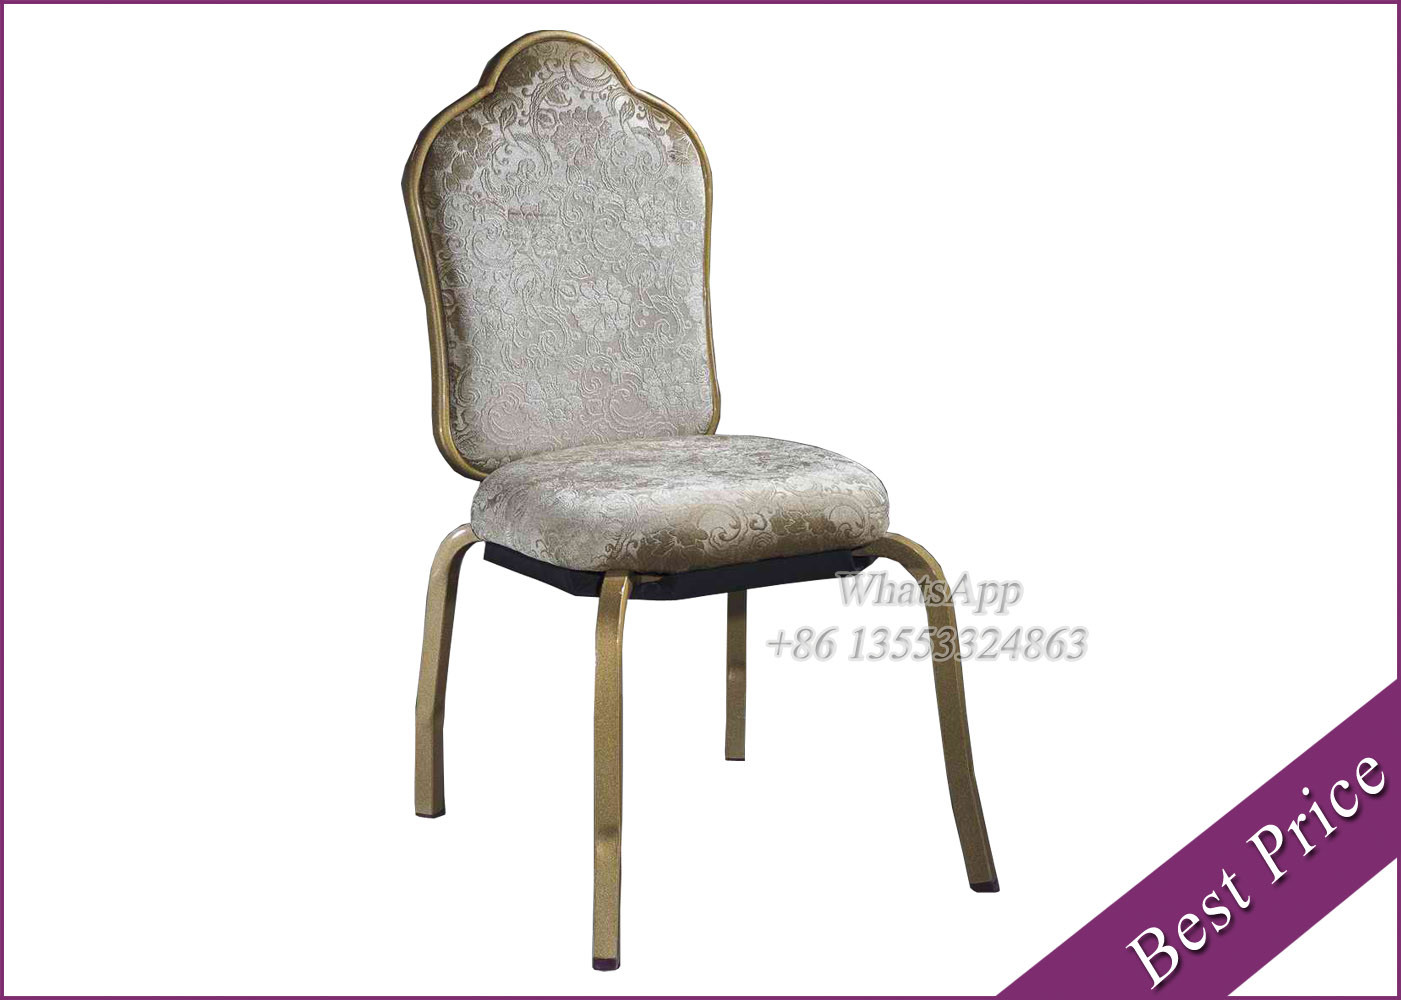 Metal Banquette Chairs at Low Price in Chinese Wholesale (YF-27)